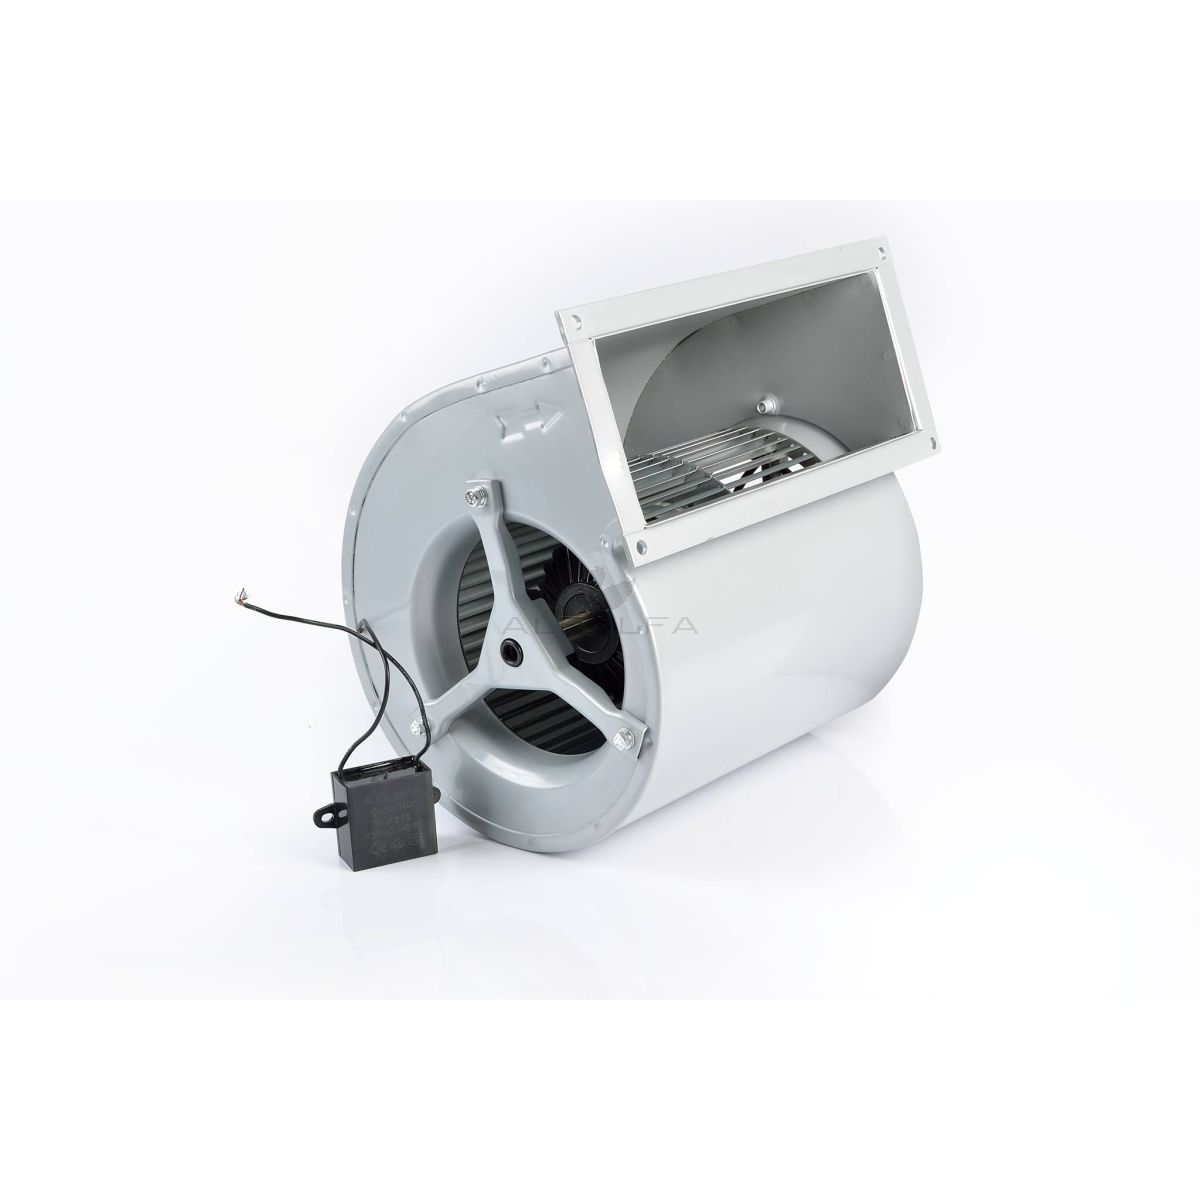 Centrifuge Fan Complete w/ Filter, Carbon, & Speed Control